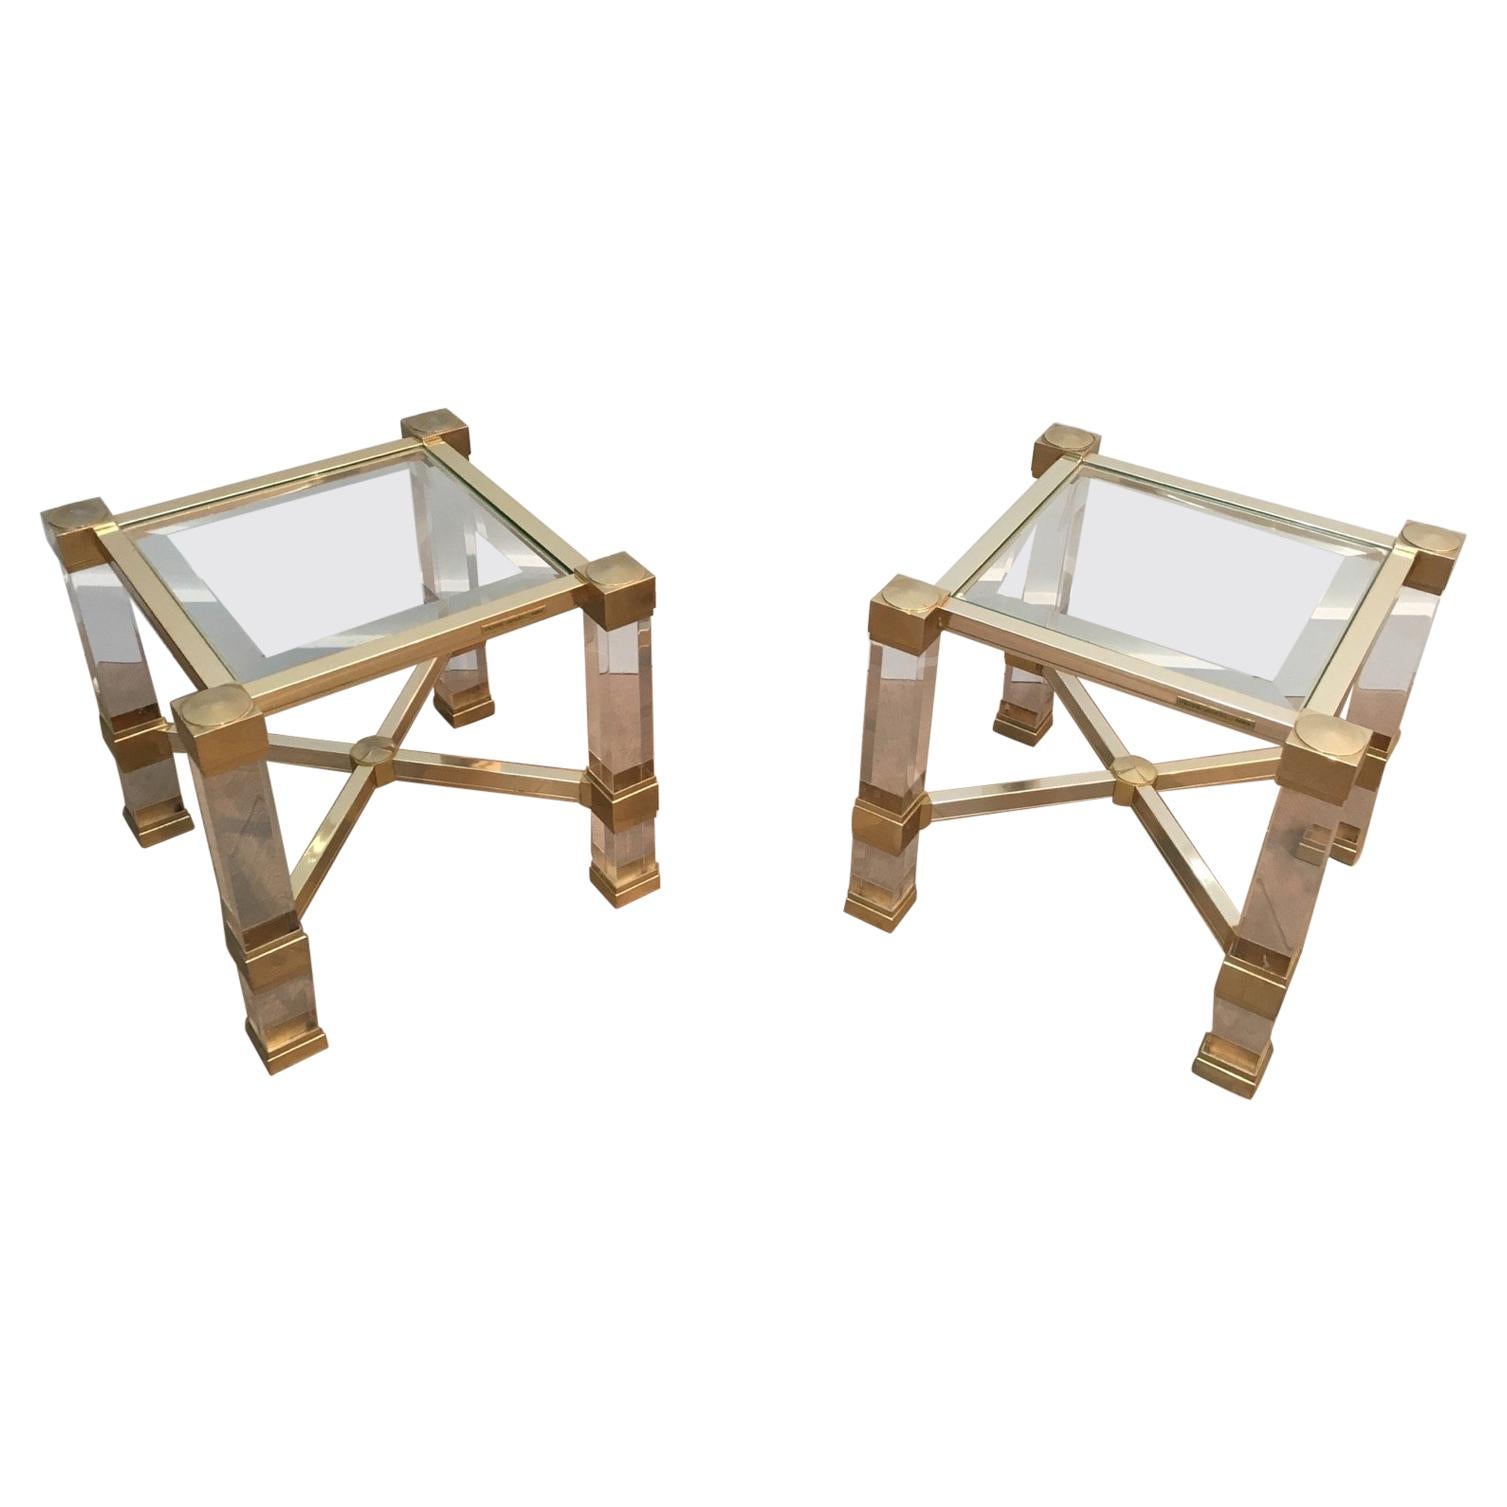 Pierre Vandel. Pair of Lucite and Gold Gilt Side Tables. French. Cir